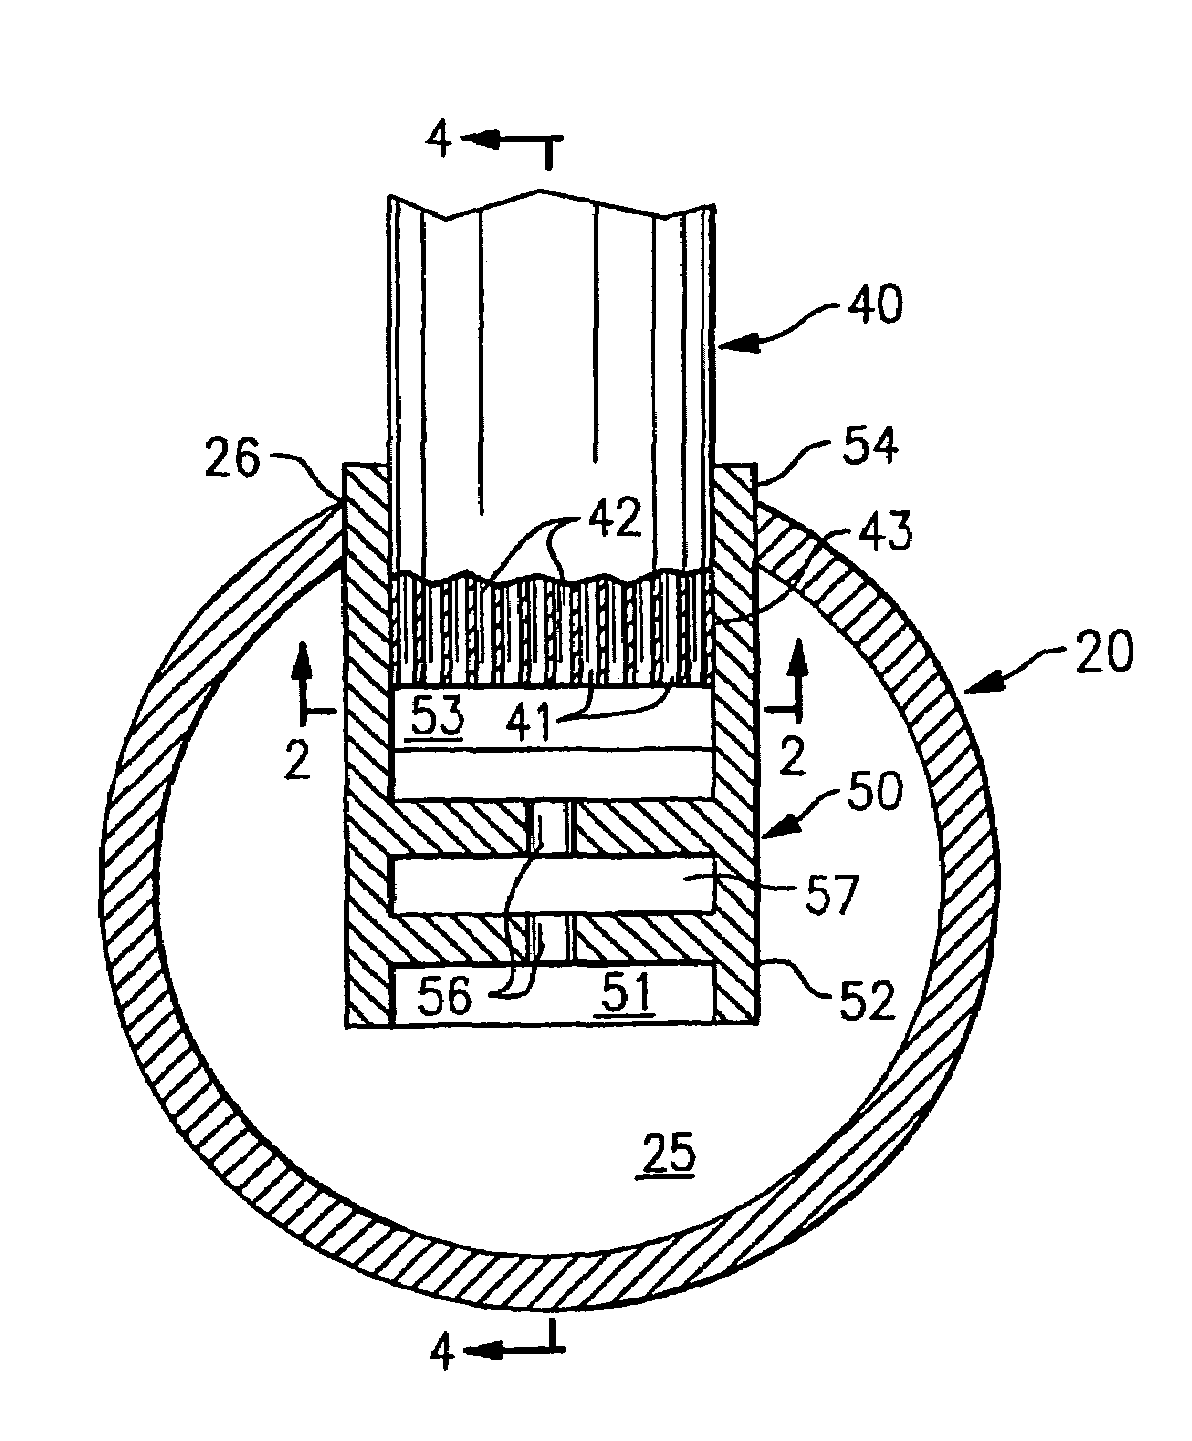 Heat exchanger with multiple stage fluid expansion in header